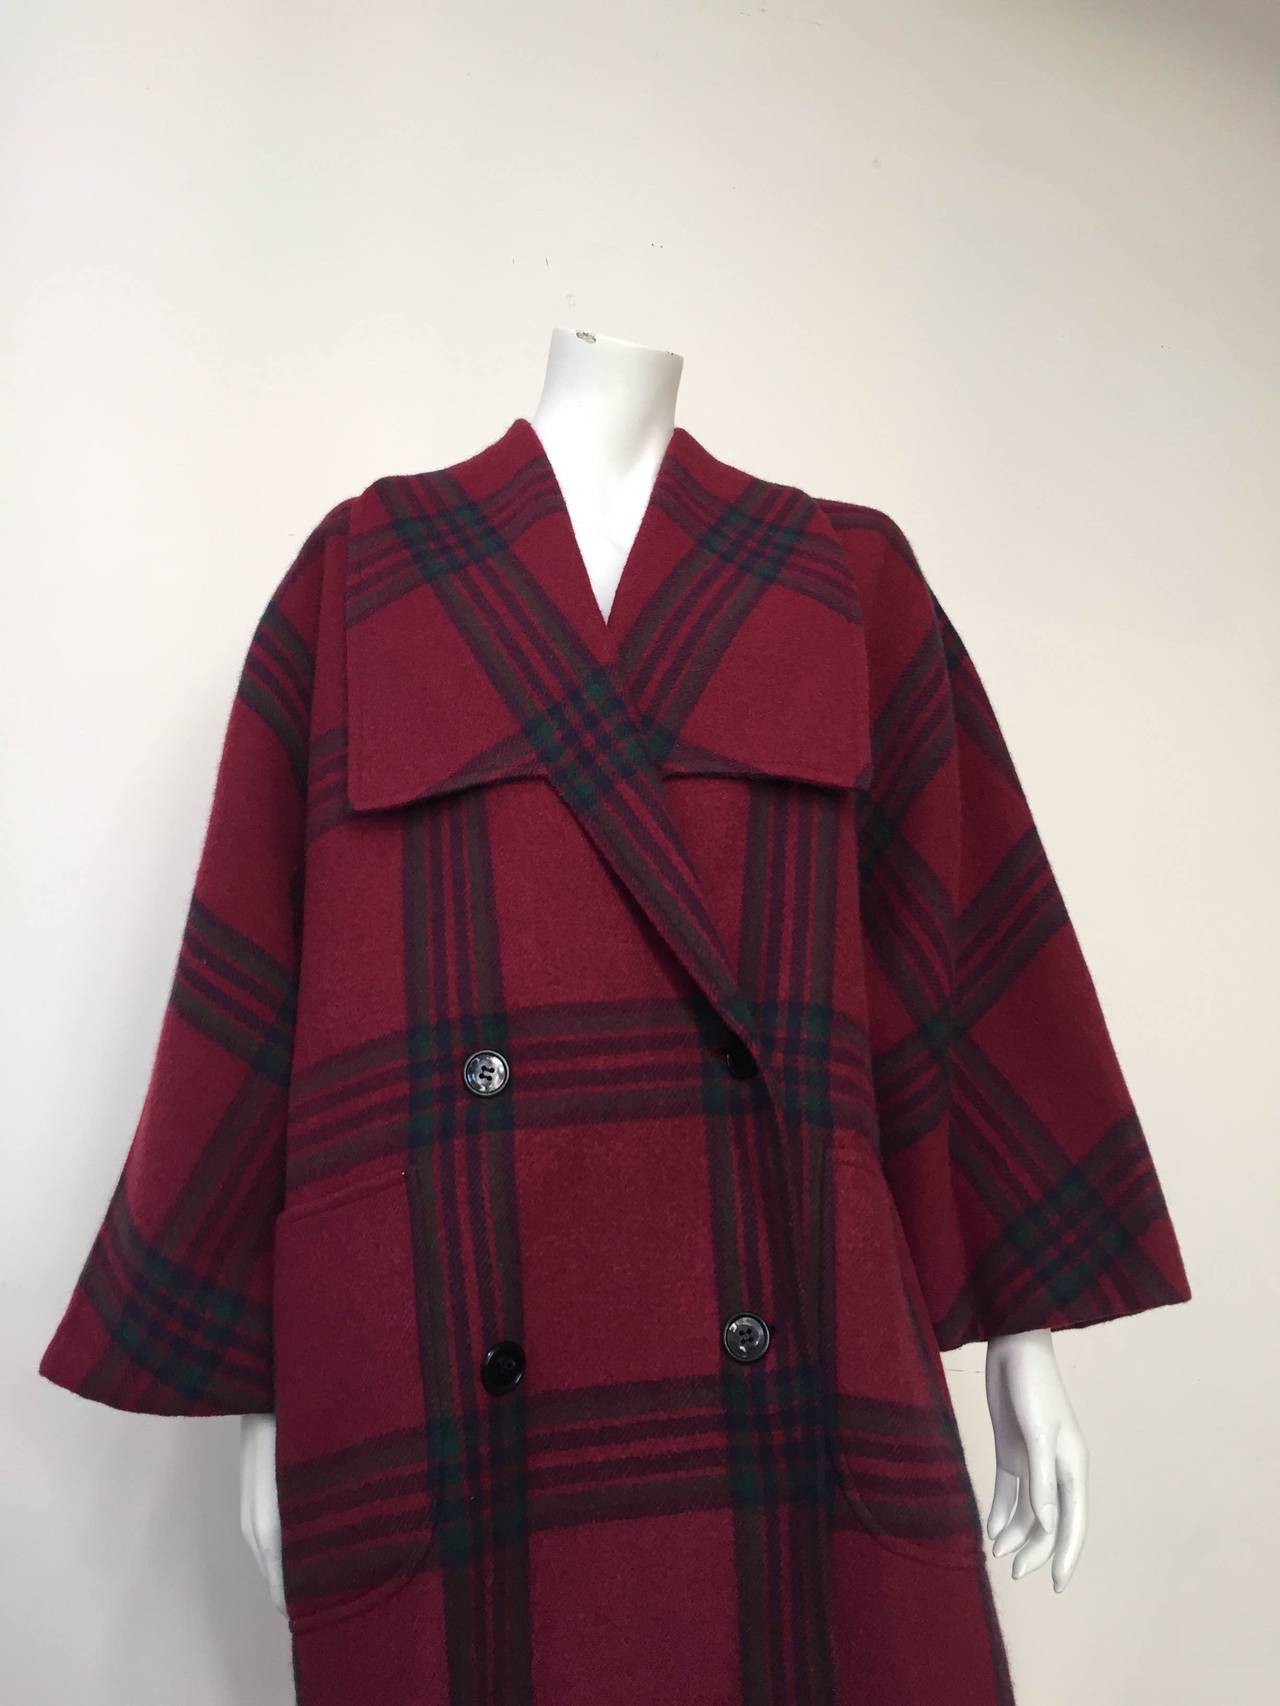 Oscar de la Renta 90s plaid wool boxy delicious cocoon coat with two front large pockets. Made in Italy size 10. 50% wool & 50% alpacha.  Wide collars and plaid pattern makes this coat a statement piece. It could easily be worn as a dress.